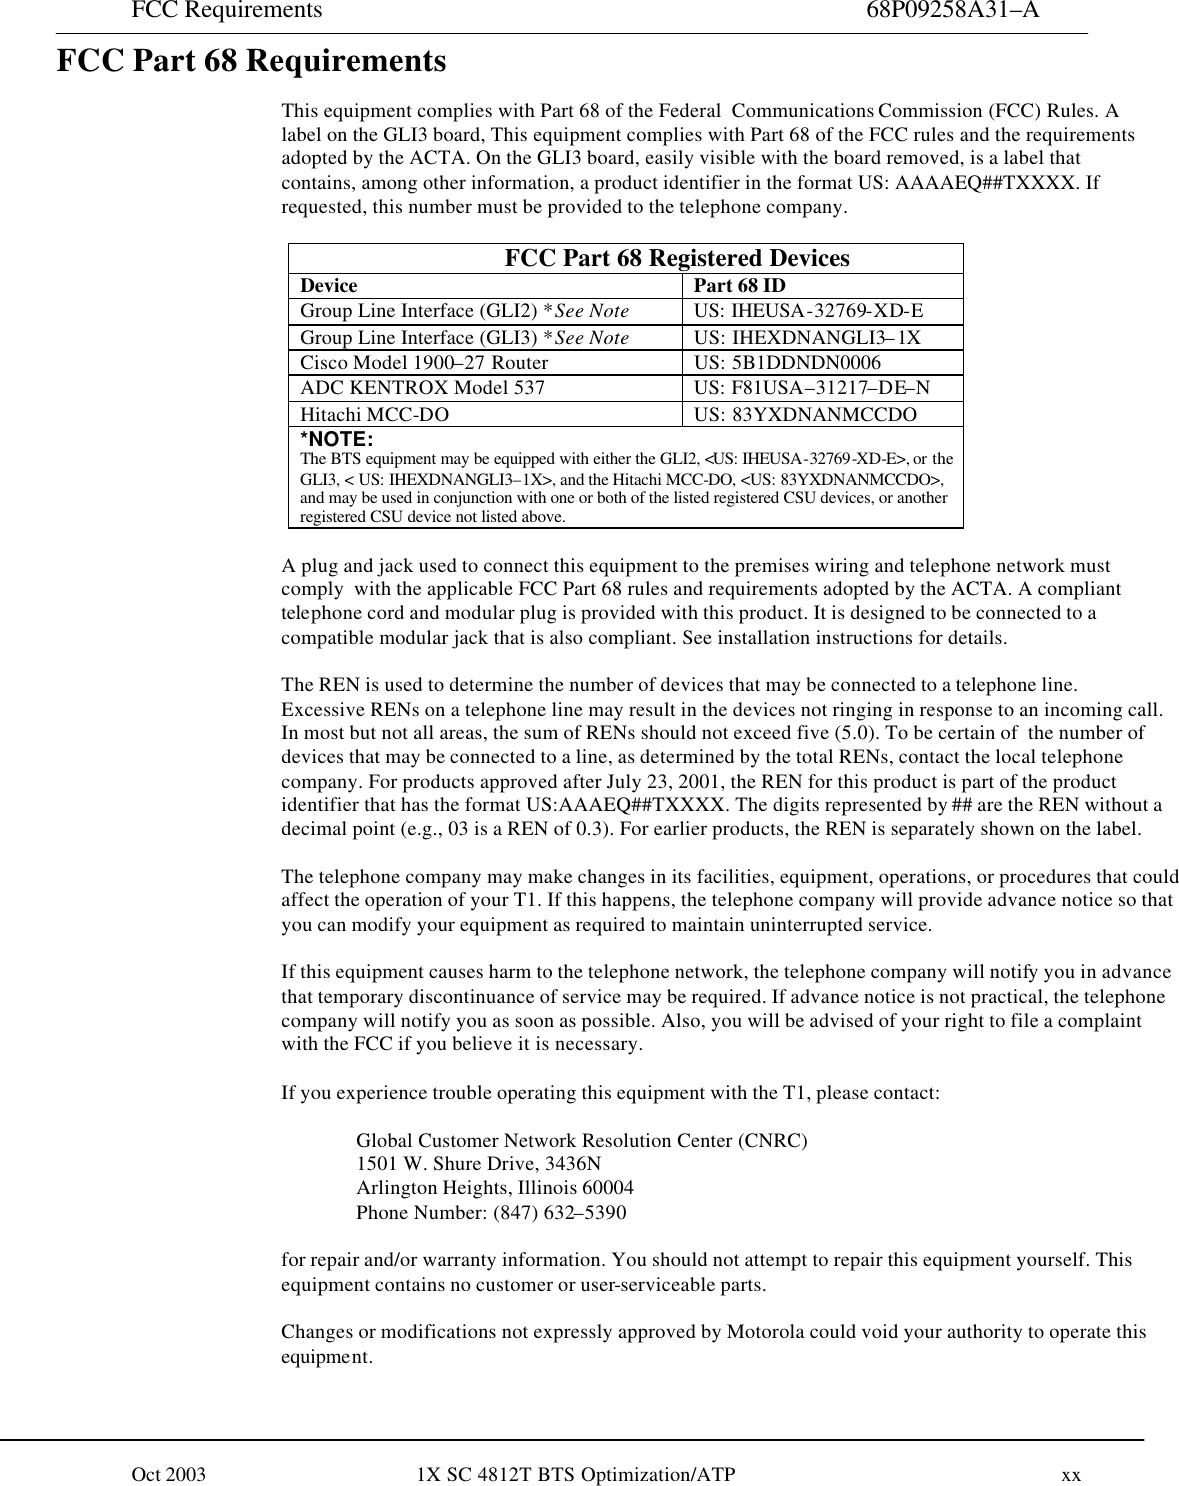 FCC Requirements  68P09258A31–A Oct 2003                         1X SC 4812T BTS Optimization/ATP                                       xx  FCC Part 68 Requirements    This equipment complies with Part 68 of the Federal  Communications Commission (FCC) Rules. A label on the GLI3 board, This equipment complies with Part 68 of the FCC rules and the requirements adopted by the ACTA. On the GLI3 board, easily visible with the board removed, is a label that contains, among other information, a product identifier in the format US: AAAAEQ##TXXXX. If requested, this number must be provided to the telephone company.  FCC Part 68 Registered Devices Device Part 68 ID Group Line Interface (GLI2) *See Note US: IHEUSA-32769-XD-E Group Line Interface (GLI3) *See Note US: IHEXDNANGLI3–1X Cisco Model 1900–27 Router US: 5B1DDNDN0006 ADC KENTROX Model 537 US: F81USA–31217–DE–N Hitachi MCC-DO US: 83YXDNANMCCDO *NOTE: The BTS equipment may be equipped with either the GLI2, &lt;US: IHEUSA-32769-XD-E&gt;, or the GLI3, &lt; US: IHEXDNANGLI3–1X&gt;, and the Hitachi MCC-DO, &lt;US: 83YXDNANMCCDO&gt;, and may be used in conjunction with one or both of the listed registered CSU devices, or another registered CSU device not listed above.      A plug and jack used to connect this equipment to the premises wiring and telephone network must comply  with the applicable FCC Part 68 rules and requirements adopted by the ACTA. A compliant telephone cord and modular plug is provided with this product. It is designed to be connected to a compatible modular jack that is also compliant. See installation instructions for details.  The REN is used to determine the number of devices that may be connected to a telephone line. Excessive RENs on a telephone line may result in the devices not ringing in response to an incoming call. In most but not all areas, the sum of RENs should not exceed five (5.0). To be certain of  the number of devices that may be connected to a line, as determined by the total RENs, contact the local telephone company. For products approved after July 23, 2001, the REN for this product is part of the product identifier that has the format US:AAAEQ##TXXXX. The digits represented by ## are the REN without a decimal point (e.g., 03 is a REN of 0.3). For earlier products, the REN is separately shown on the label.  The telephone company may make changes in its facilities, equipment, operations, or procedures that could affect the operation of your T1. If this happens, the telephone company will provide advance notice so that you can modify your equipment as required to maintain uninterrupted service.  If this equipment causes harm to the telephone network, the telephone company will notify you in advance that temporary discontinuance of service may be required. If advance notice is not practical, the telephone company will notify you as soon as possible. Also, you will be advised of your right to file a complaint with the FCC if you believe it is necessary.  If you experience trouble operating this equipment with the T1, please contact:  Global Customer Network Resolution Center (CNRC) 1501 W. Shure Drive, 3436N Arlington Heights, Illinois 60004 Phone Number: (847) 632–5390  for repair and/or warranty information. You should not attempt to repair this equipment yourself. This equipment contains no customer or user-serviceable parts.  Changes or modifications not expressly approved by Motorola could void your authority to operate this equipment.  